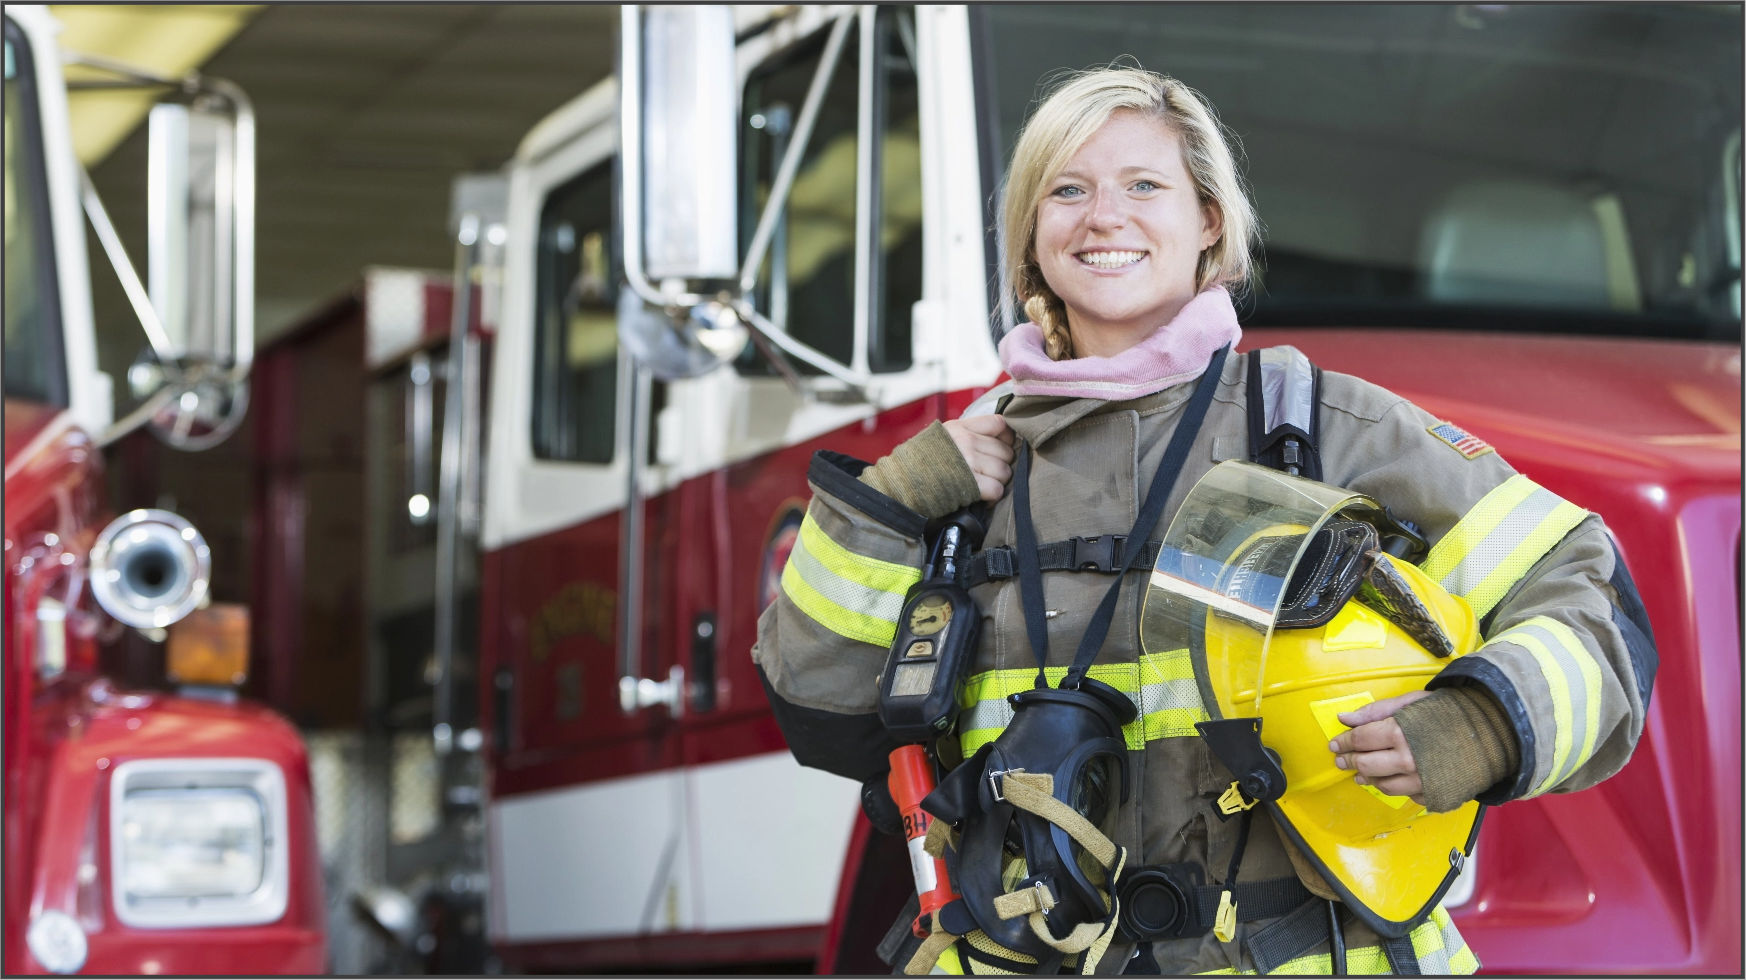 A firefighter in their bunker gear smiles in front of two firetrucks while holding their helmet